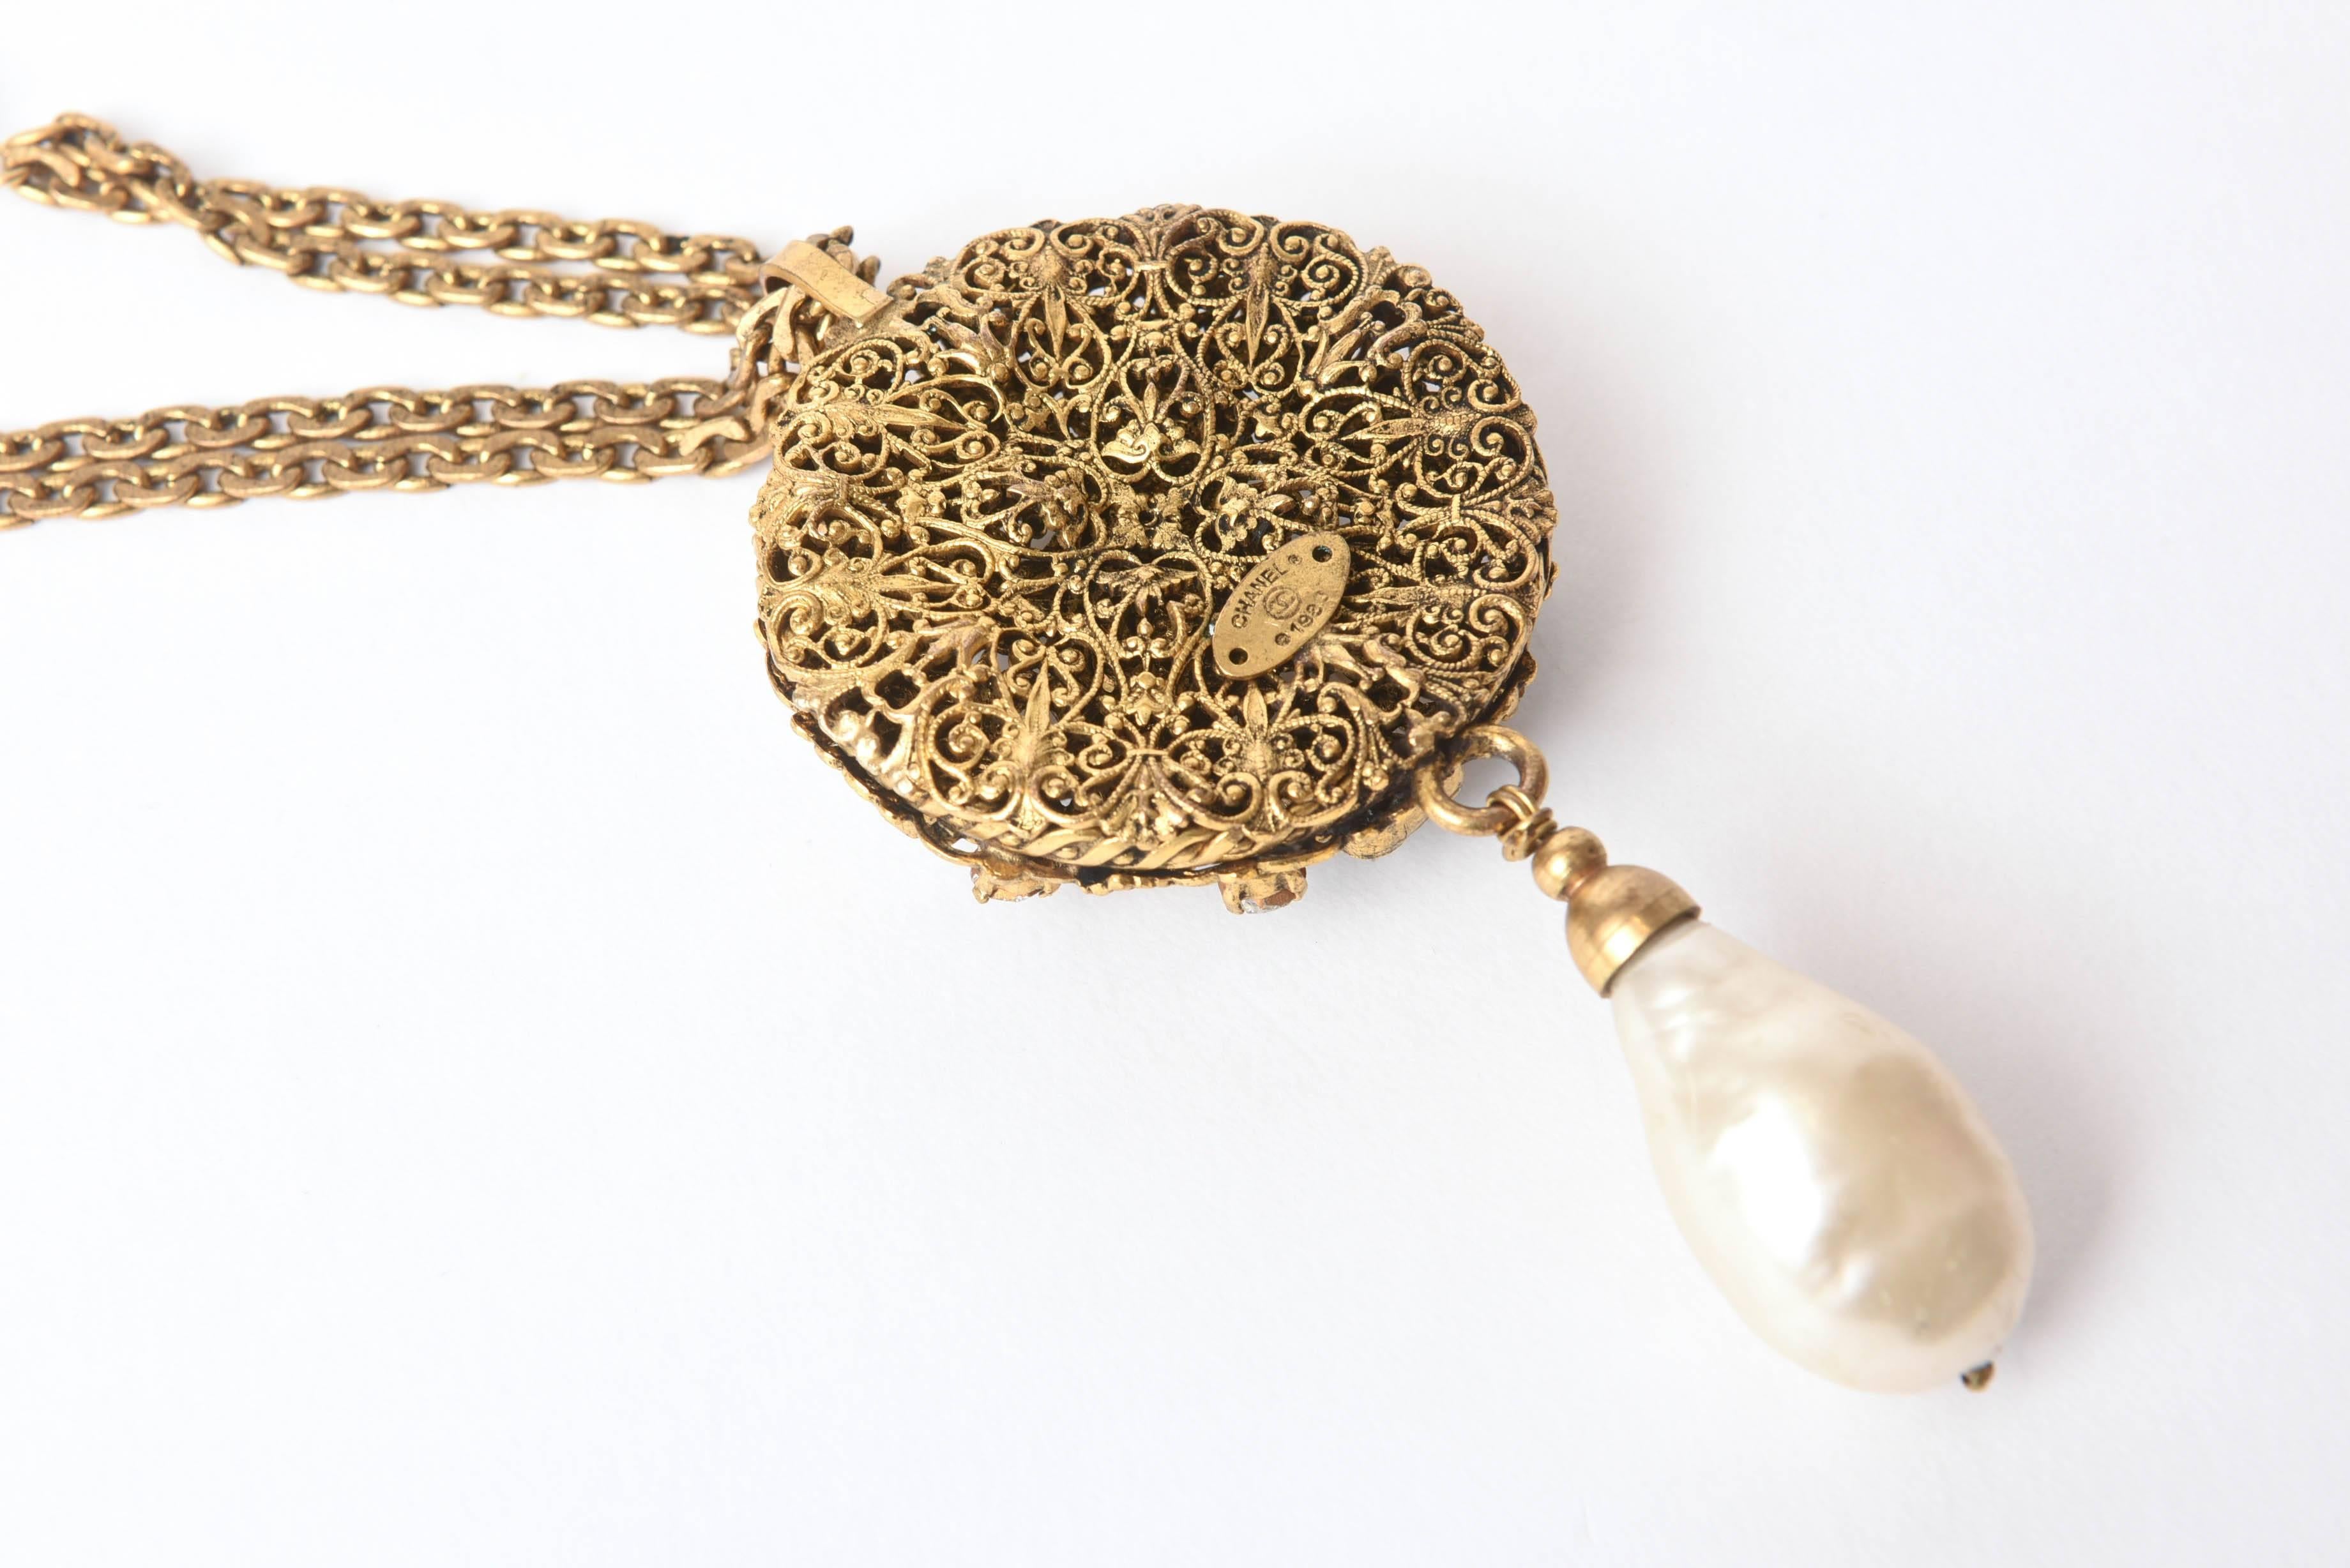 Hand-Crafted Vintage Chanel Necklace, Faux Pearl, Long and Impressive